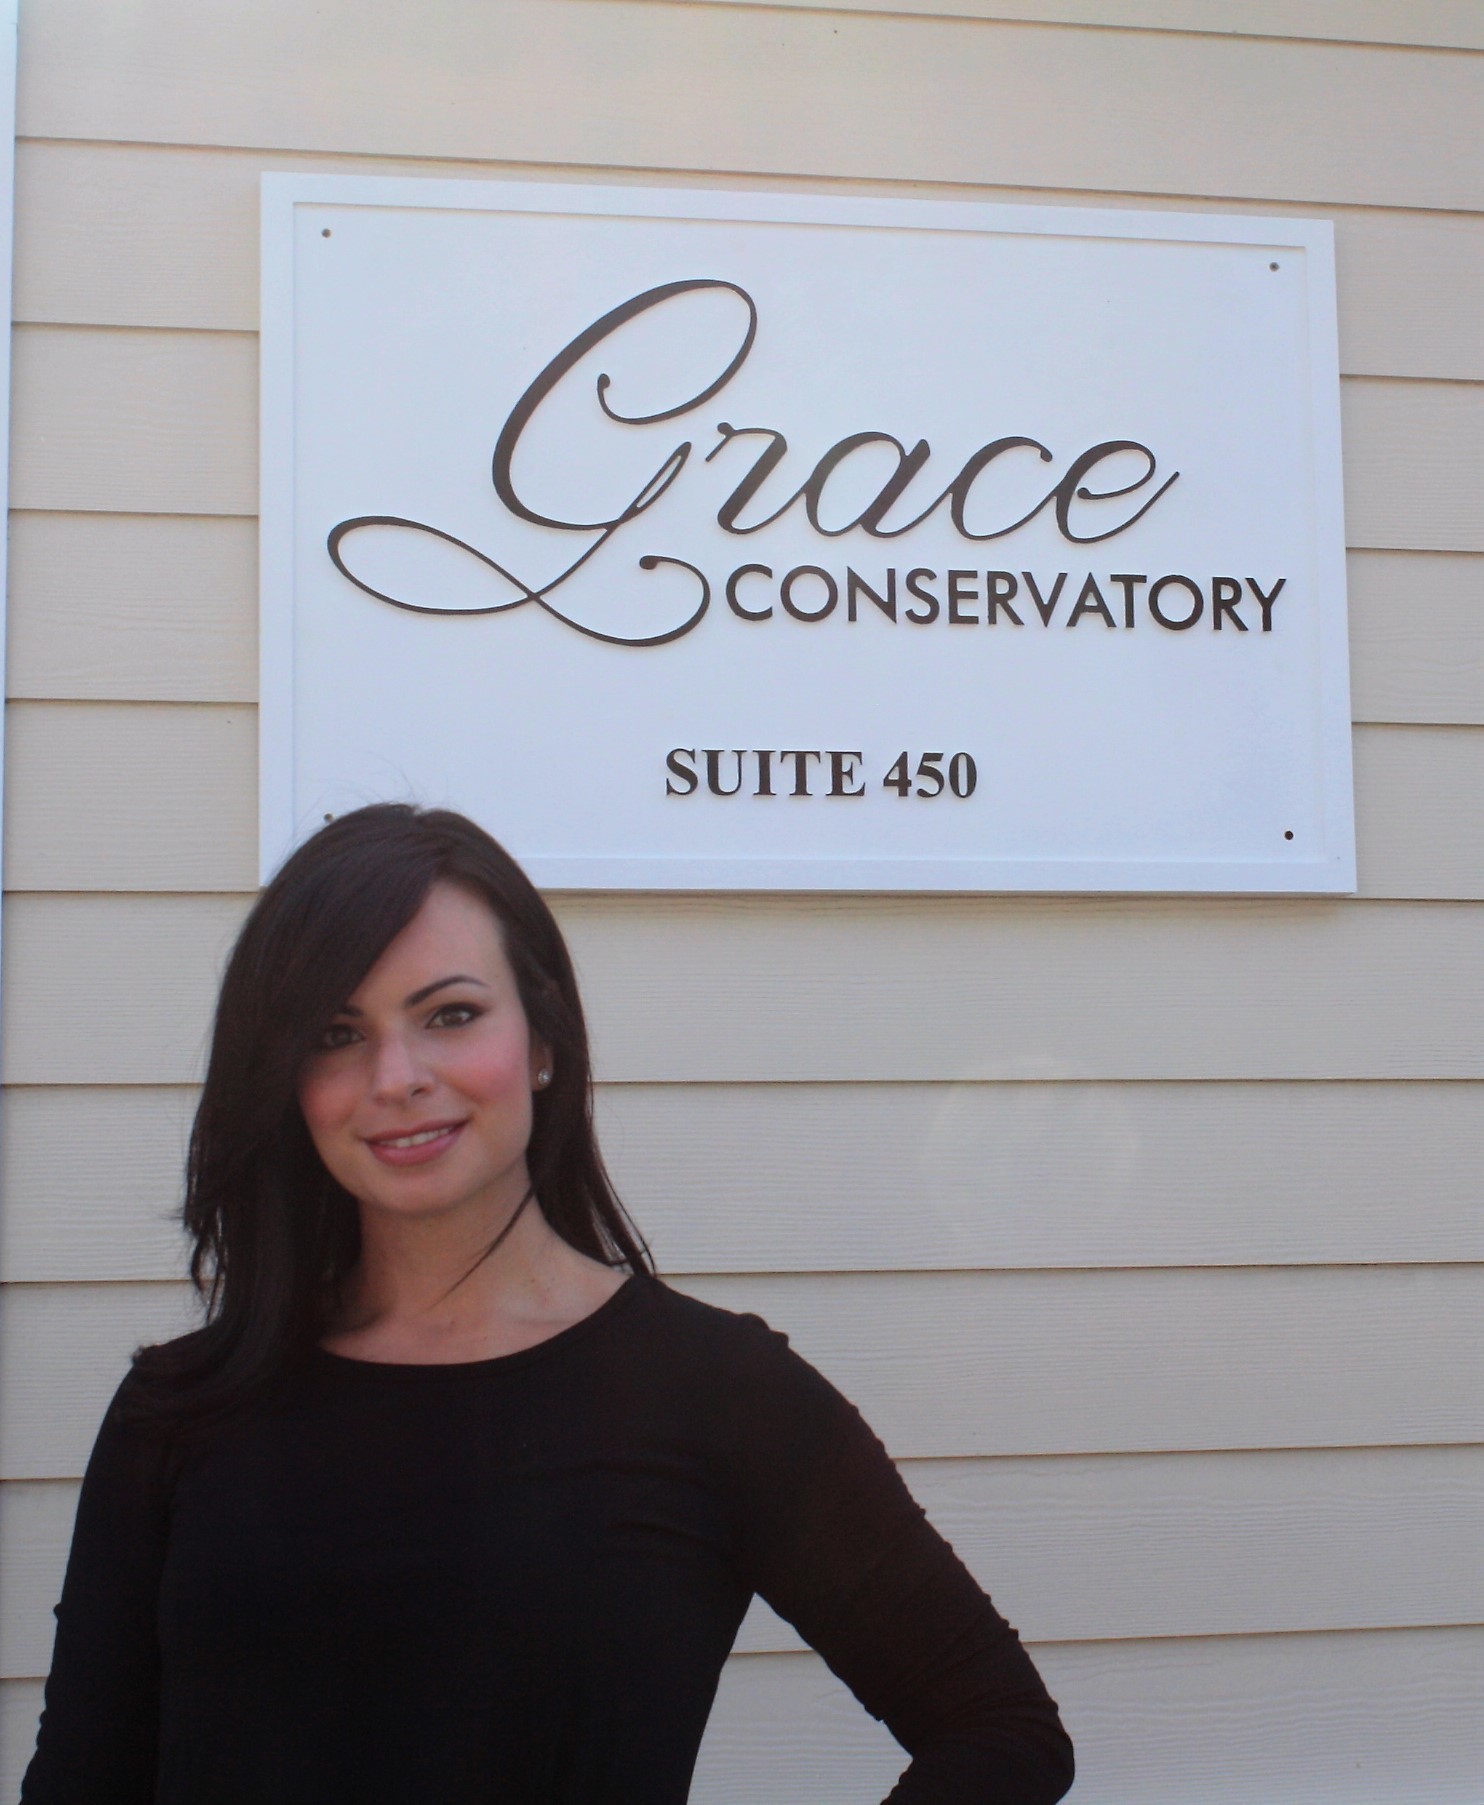 Grace Conservatory Owner Kristina Robison has more than 15 years of experience in dance education and choreography.